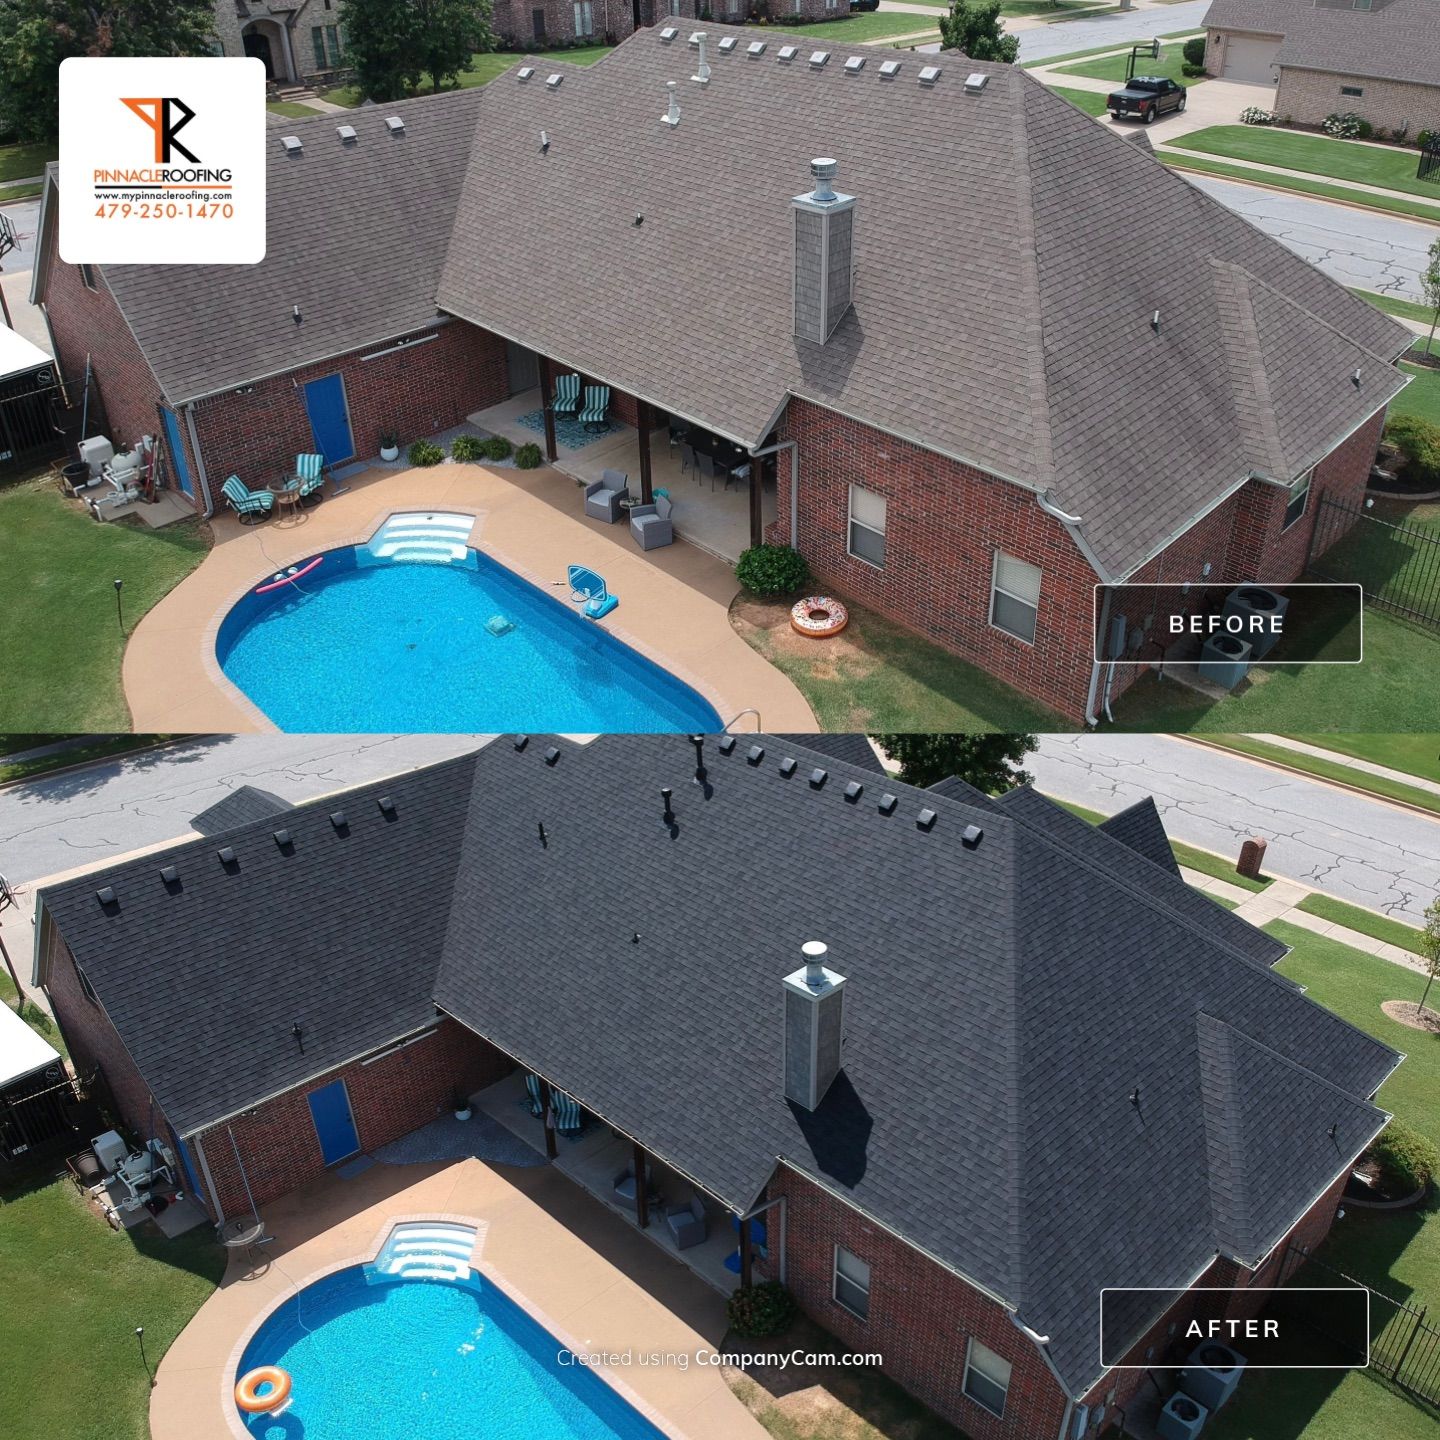 Roofing contractor, Pinnacle Roofing: new roof replacement, asphalt shingles